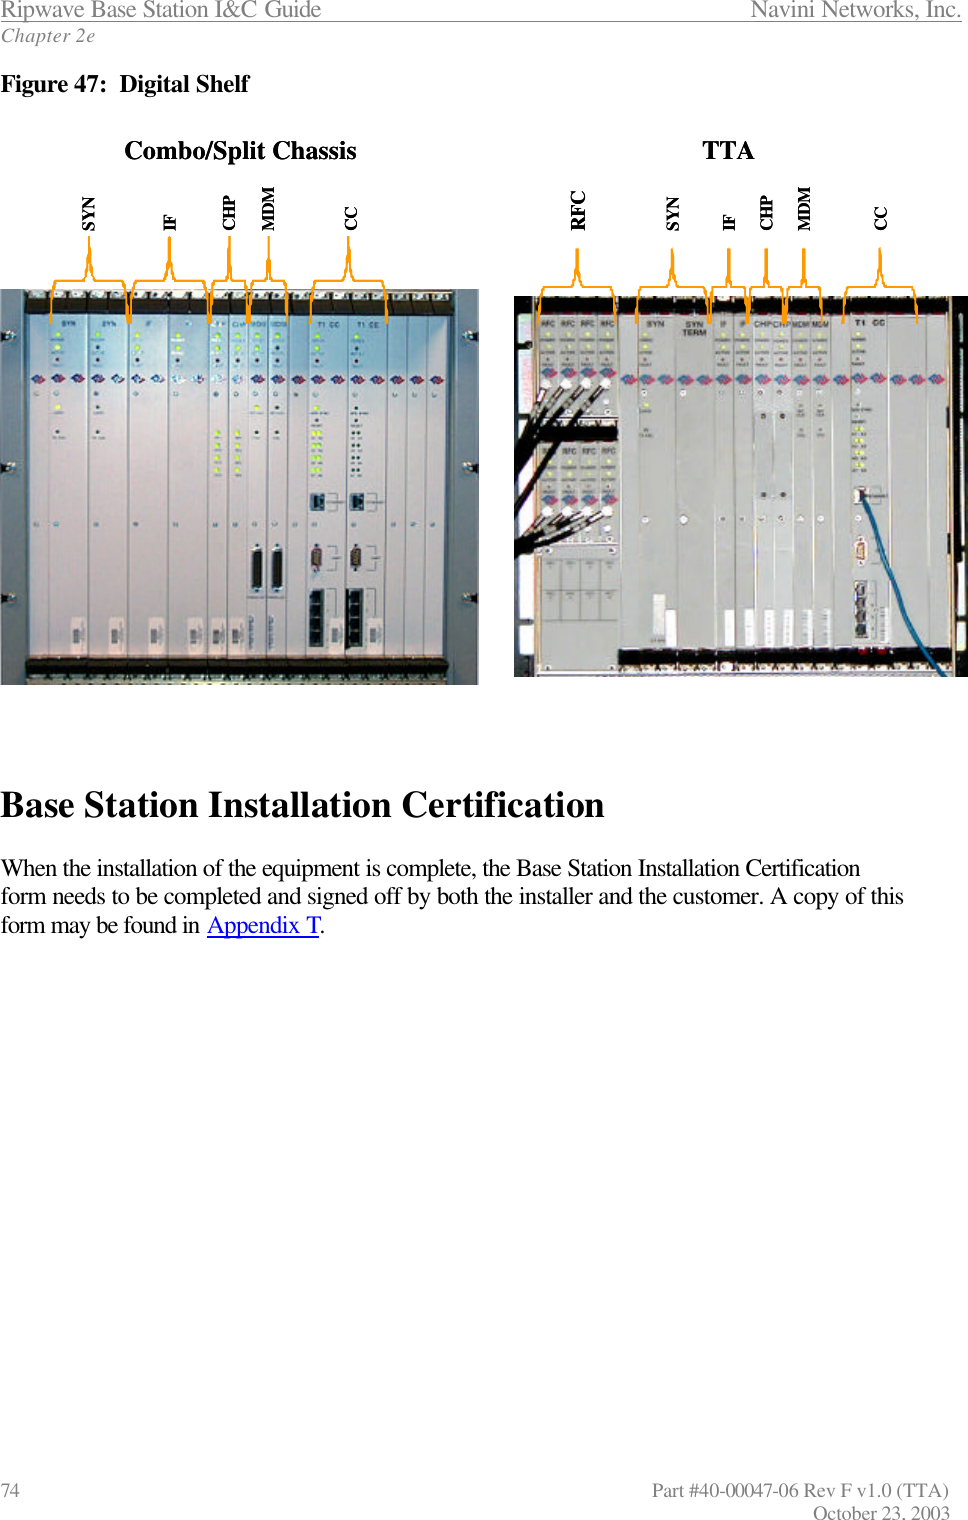 Ripwave Base Station I&amp;C Guide                 Navini Networks, Inc. Chapter 2e 74                   Part #40-00047-06 Rev F v1.0 (TTA)         October 23, 2003 Figure 47:  Digital Shelf    Base Station Installation Certification  When the installation of the equipment is complete, the Base Station Installation Certification form needs to be completed and signed off by both the installer and the customer. A copy of this form may be found in Appendix T.   SYNIFCHPMDMCCCombo/Split ChassisSYNIFCHPMDMCCRFCTTASYNIFCHPMDMCCCombo/Split ChassisSYNIFCHPMDMCCRFCTTA